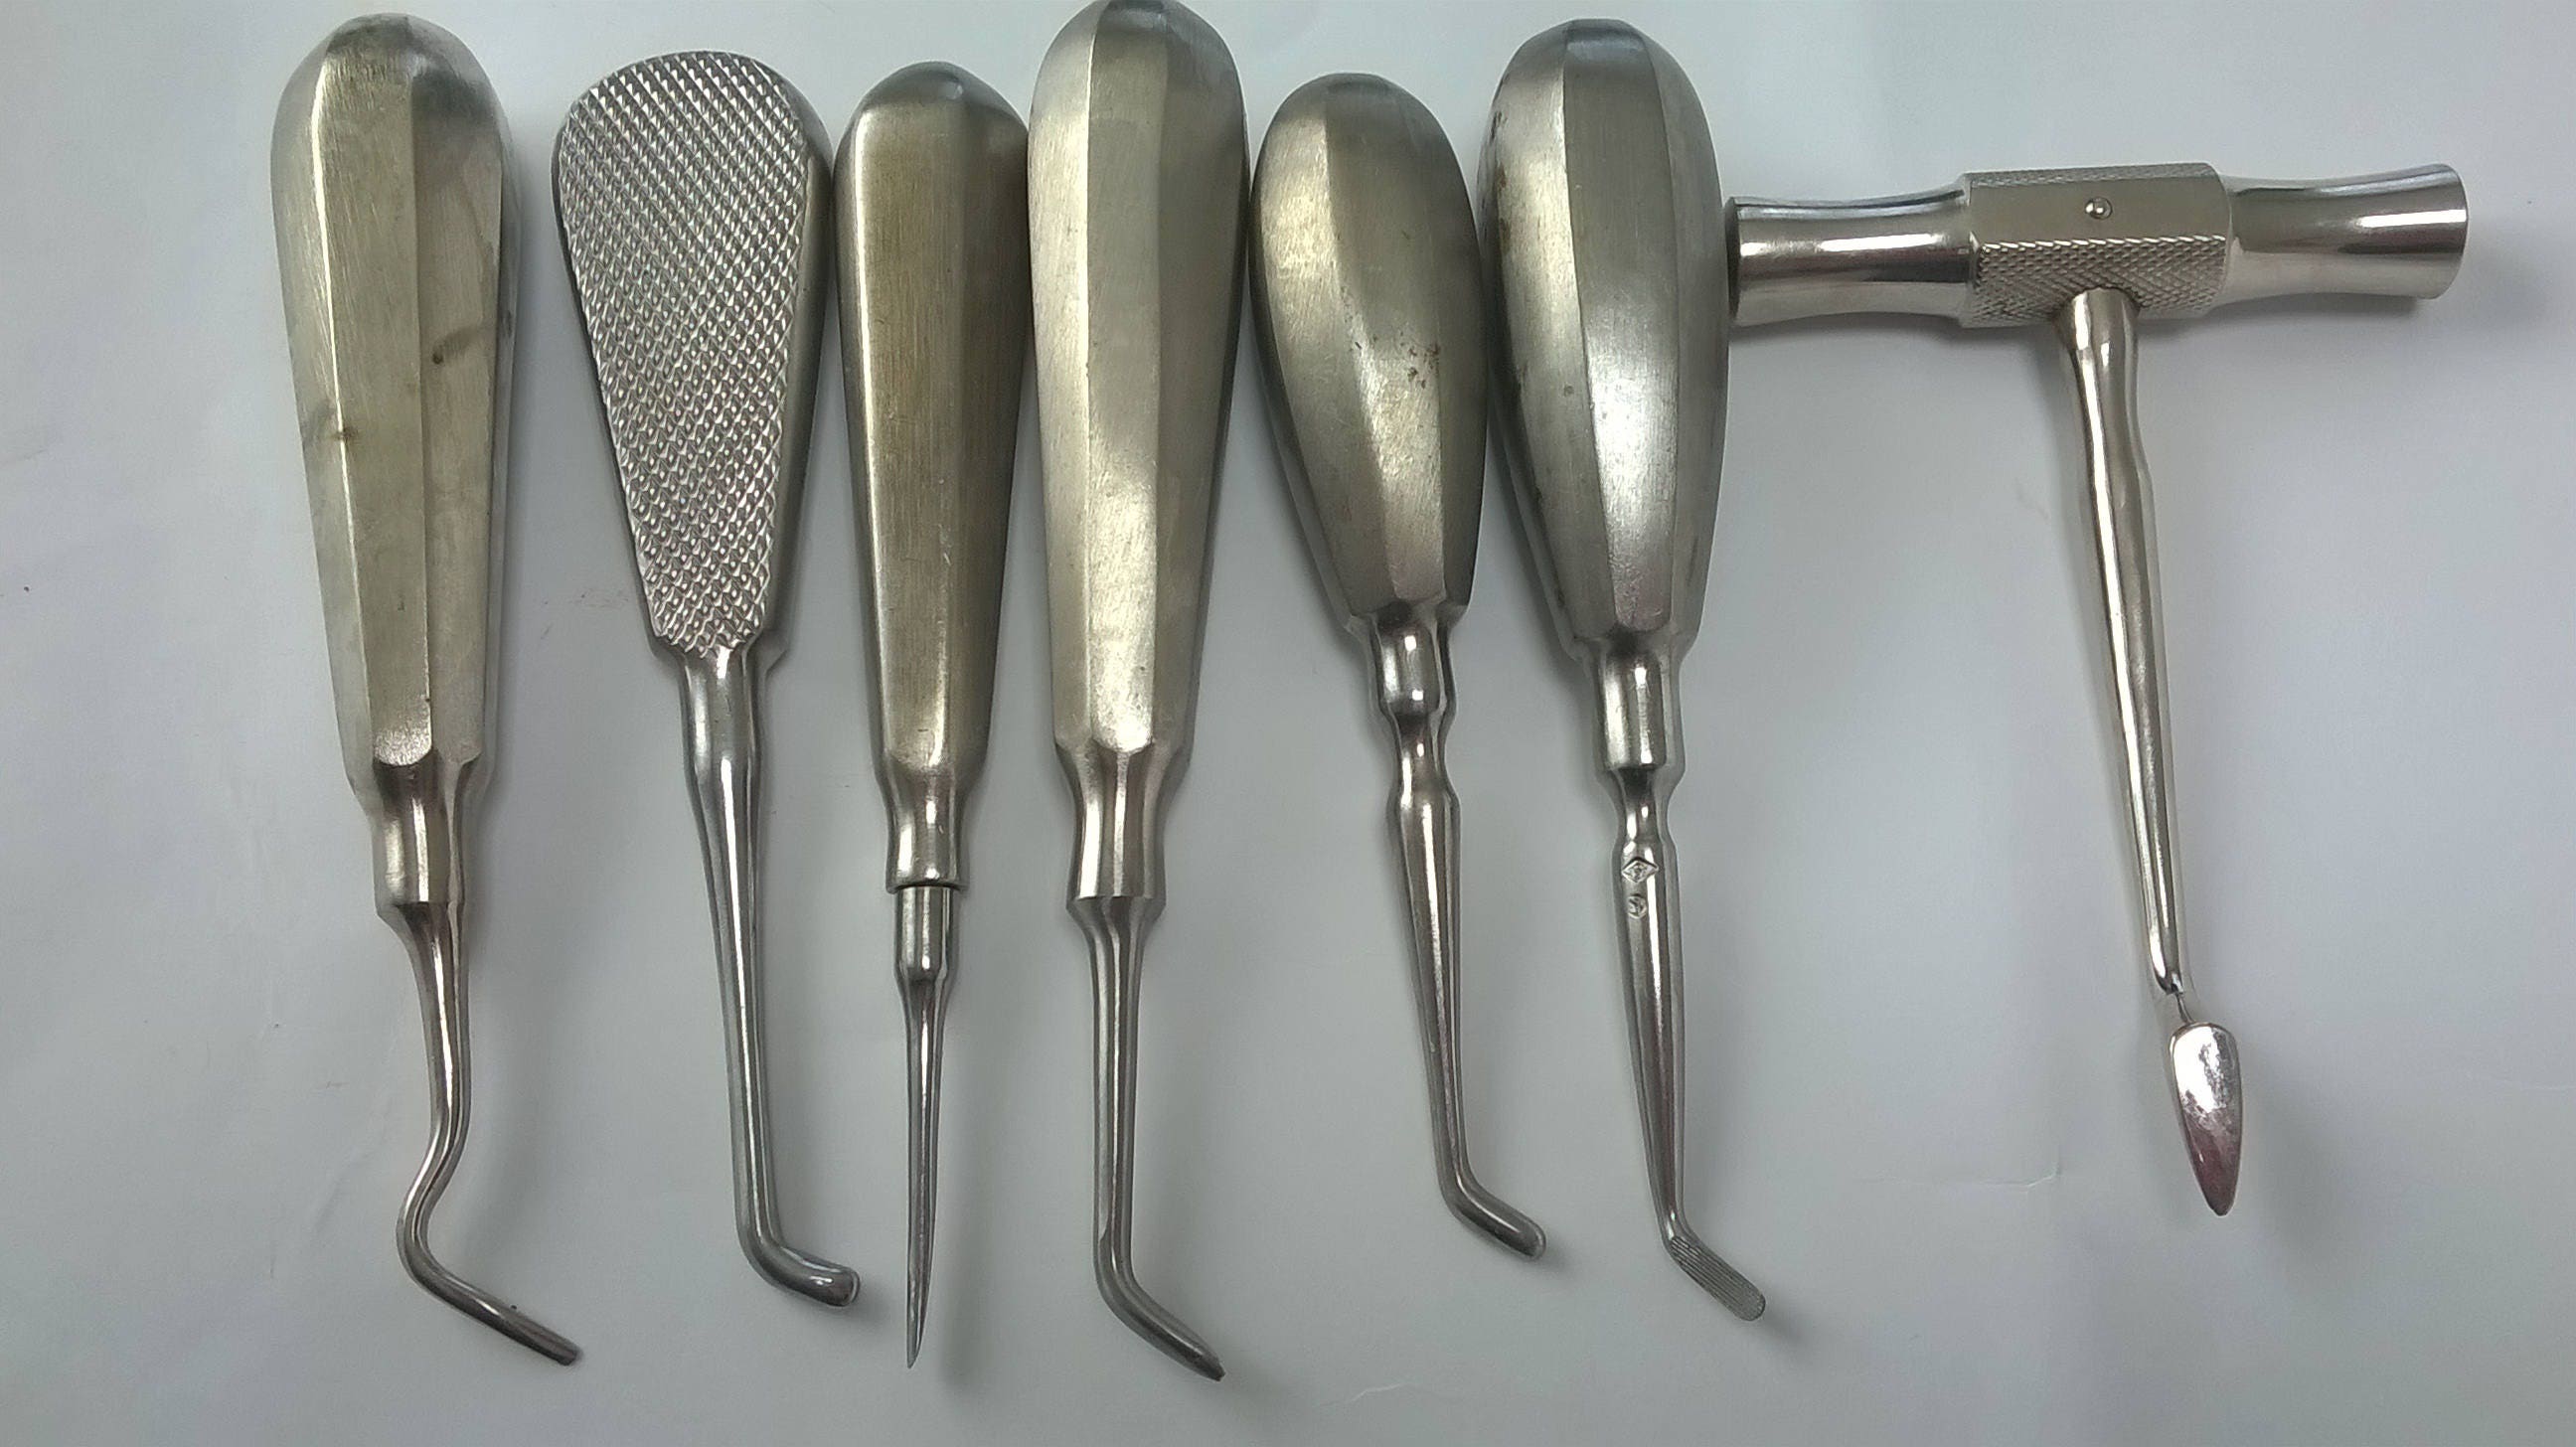 Vintage Dentist Tools Dental Tools Tooth Extraction R Stainless Steel  Vintage Medical Equipment Old Dental Instruments.seth From 7 Tools. 